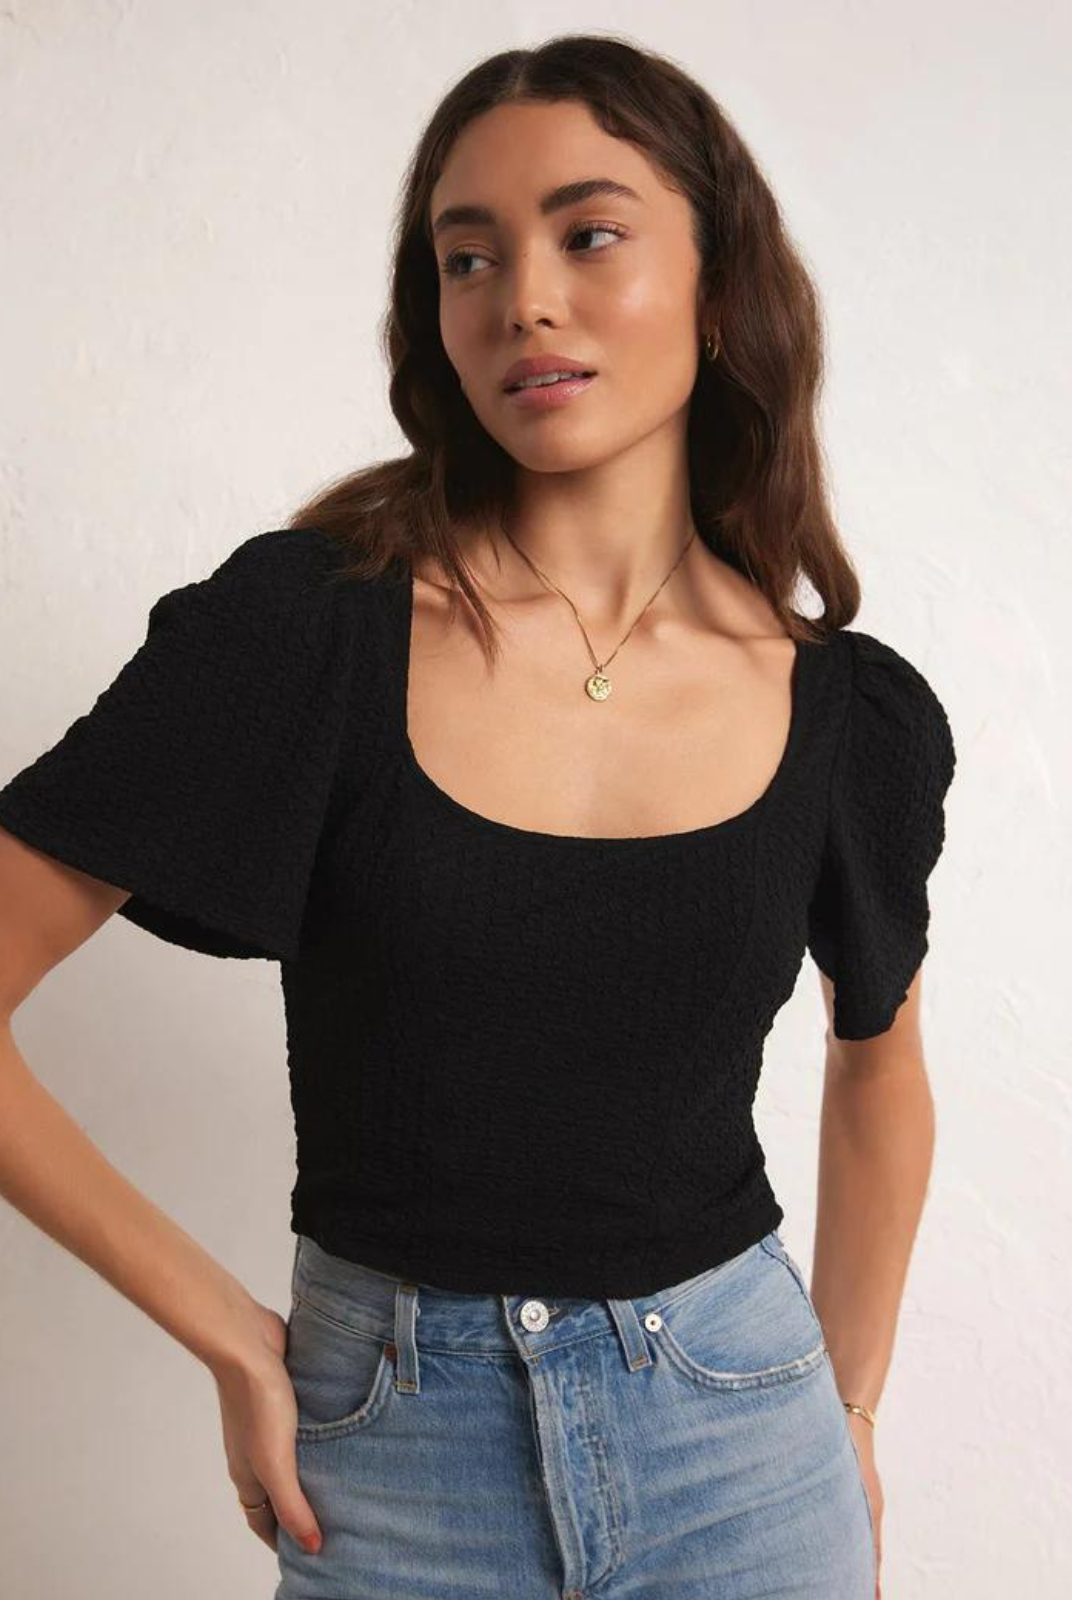 Z Supply Maxine Knit Top. With its rich, textured feel and flattering neckline, it's everything you're looking for. You'll love the princess seam details and flutter sleeves of this fun, feminine top.